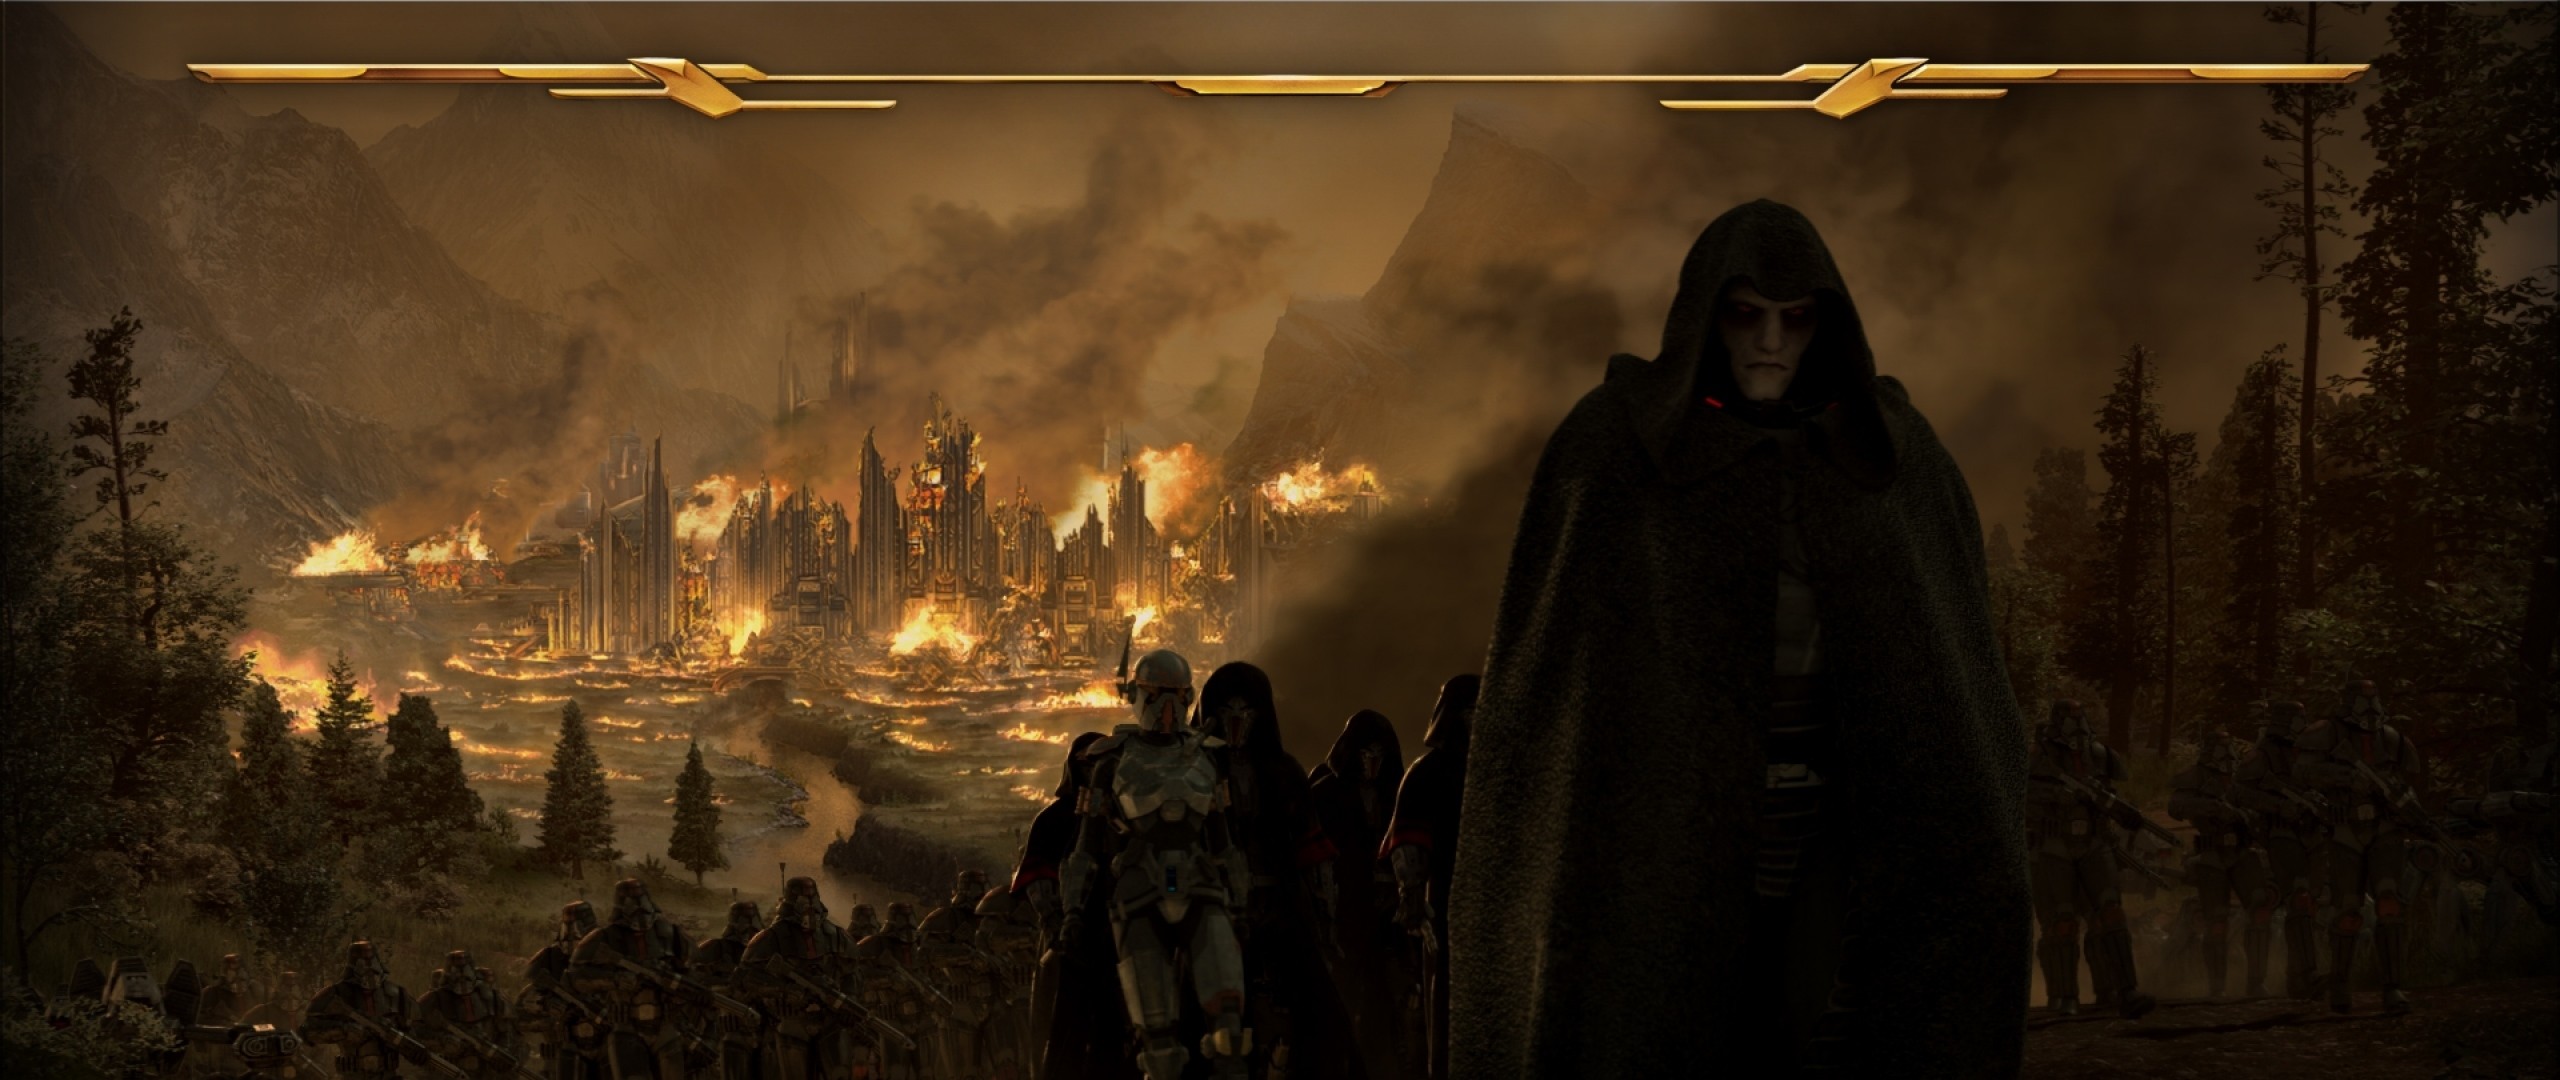 Wallpaper star wars the old republic, wildfire, forest, characters, mountains